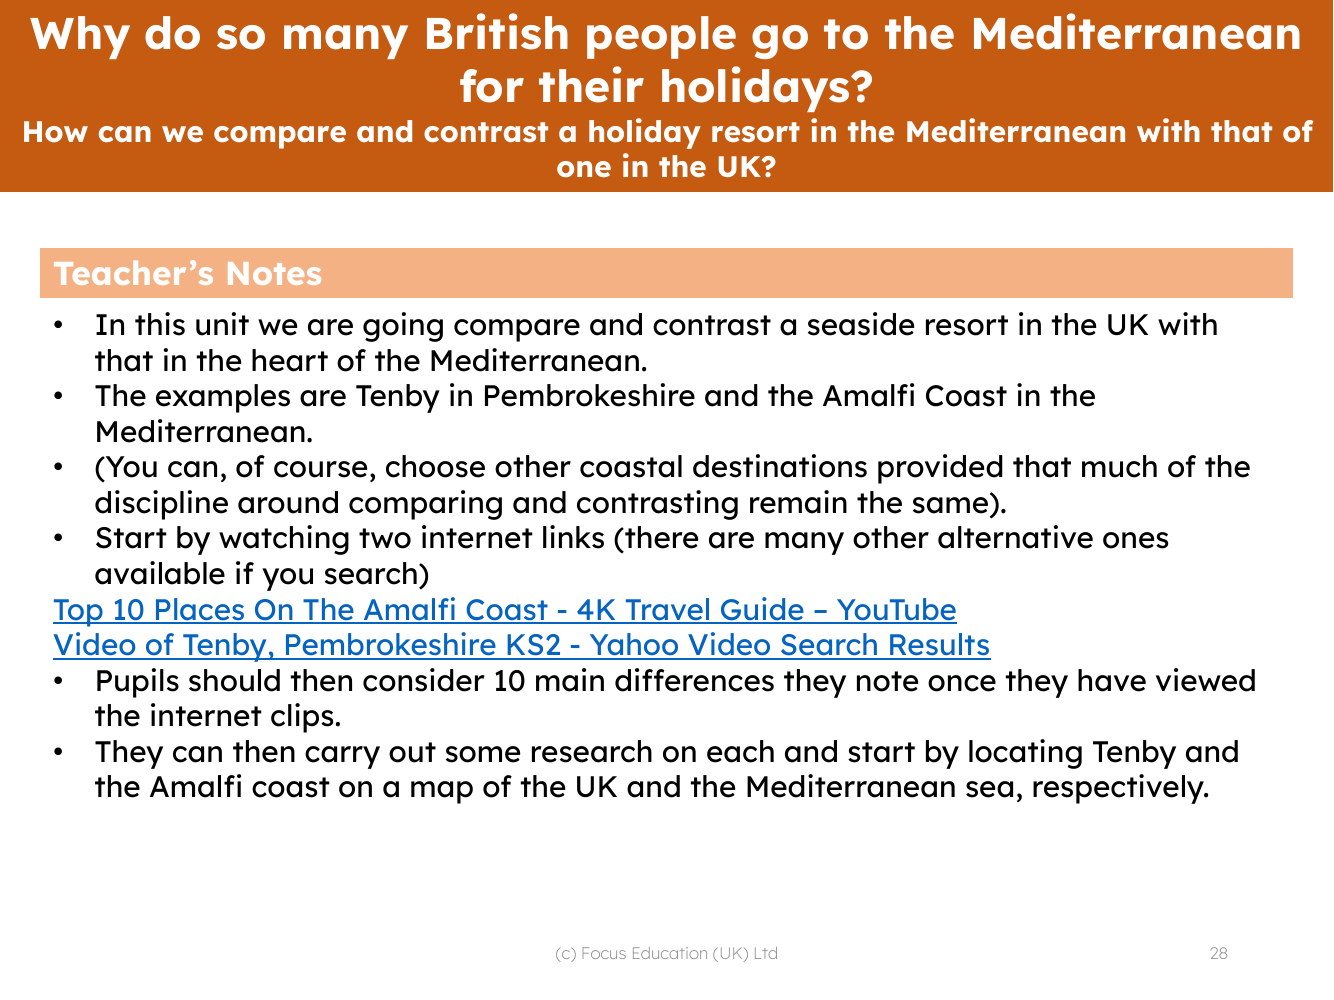 How do we compare and contrast a holiday resort in the Mediterranean with that of one in the UK? - Teacher notes